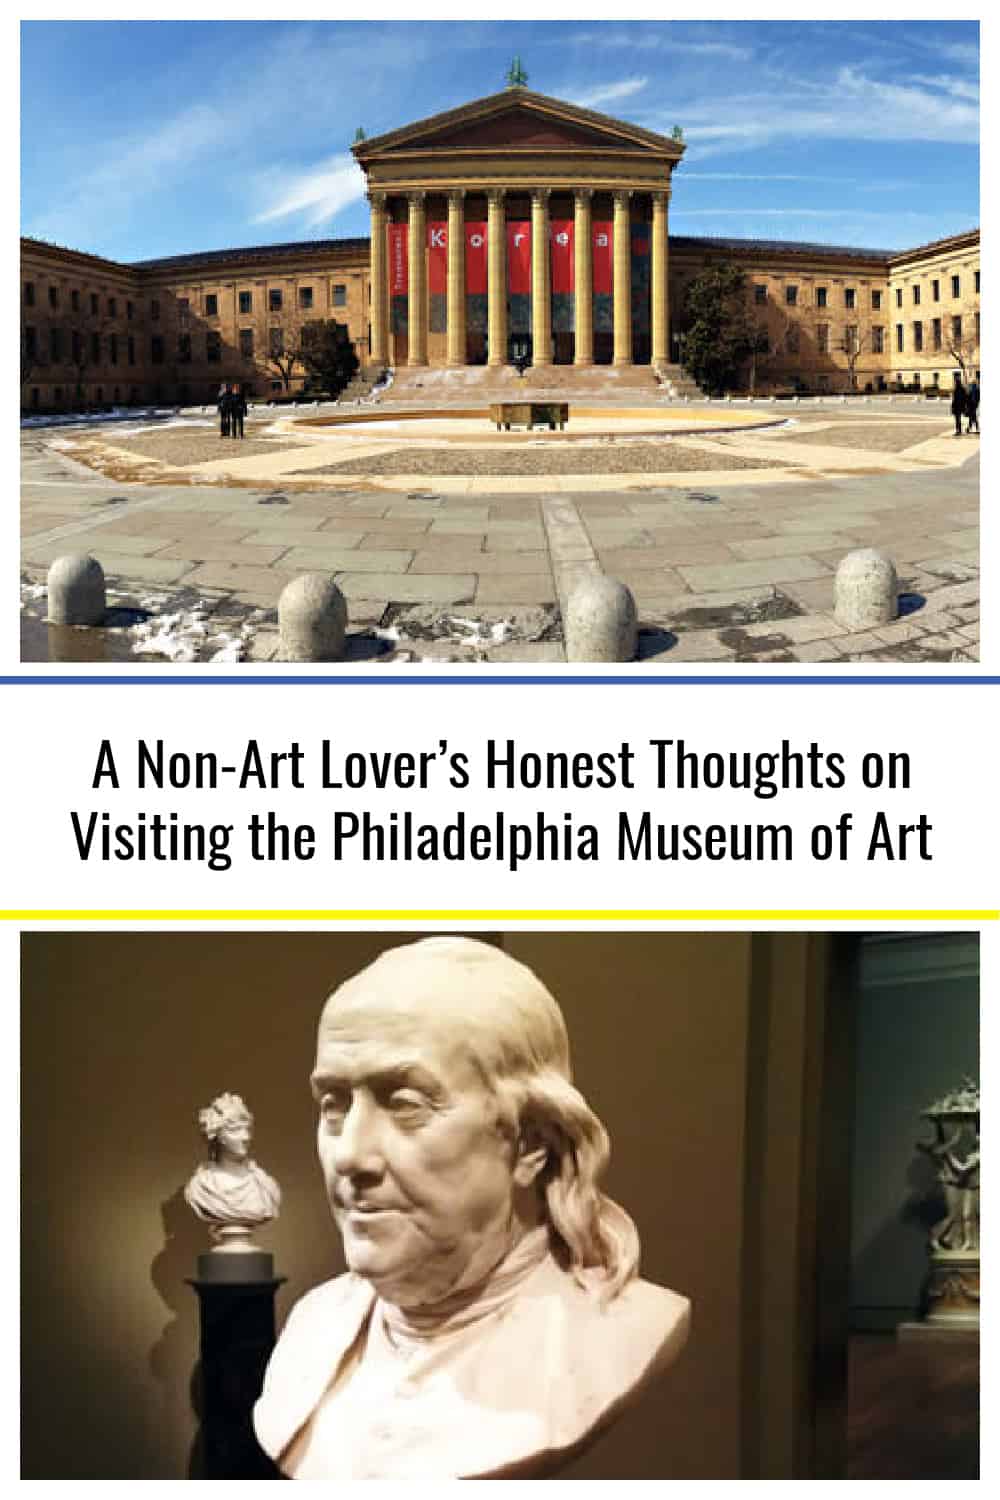 A NonArt Lover's Honest Thoughts on Visiting the